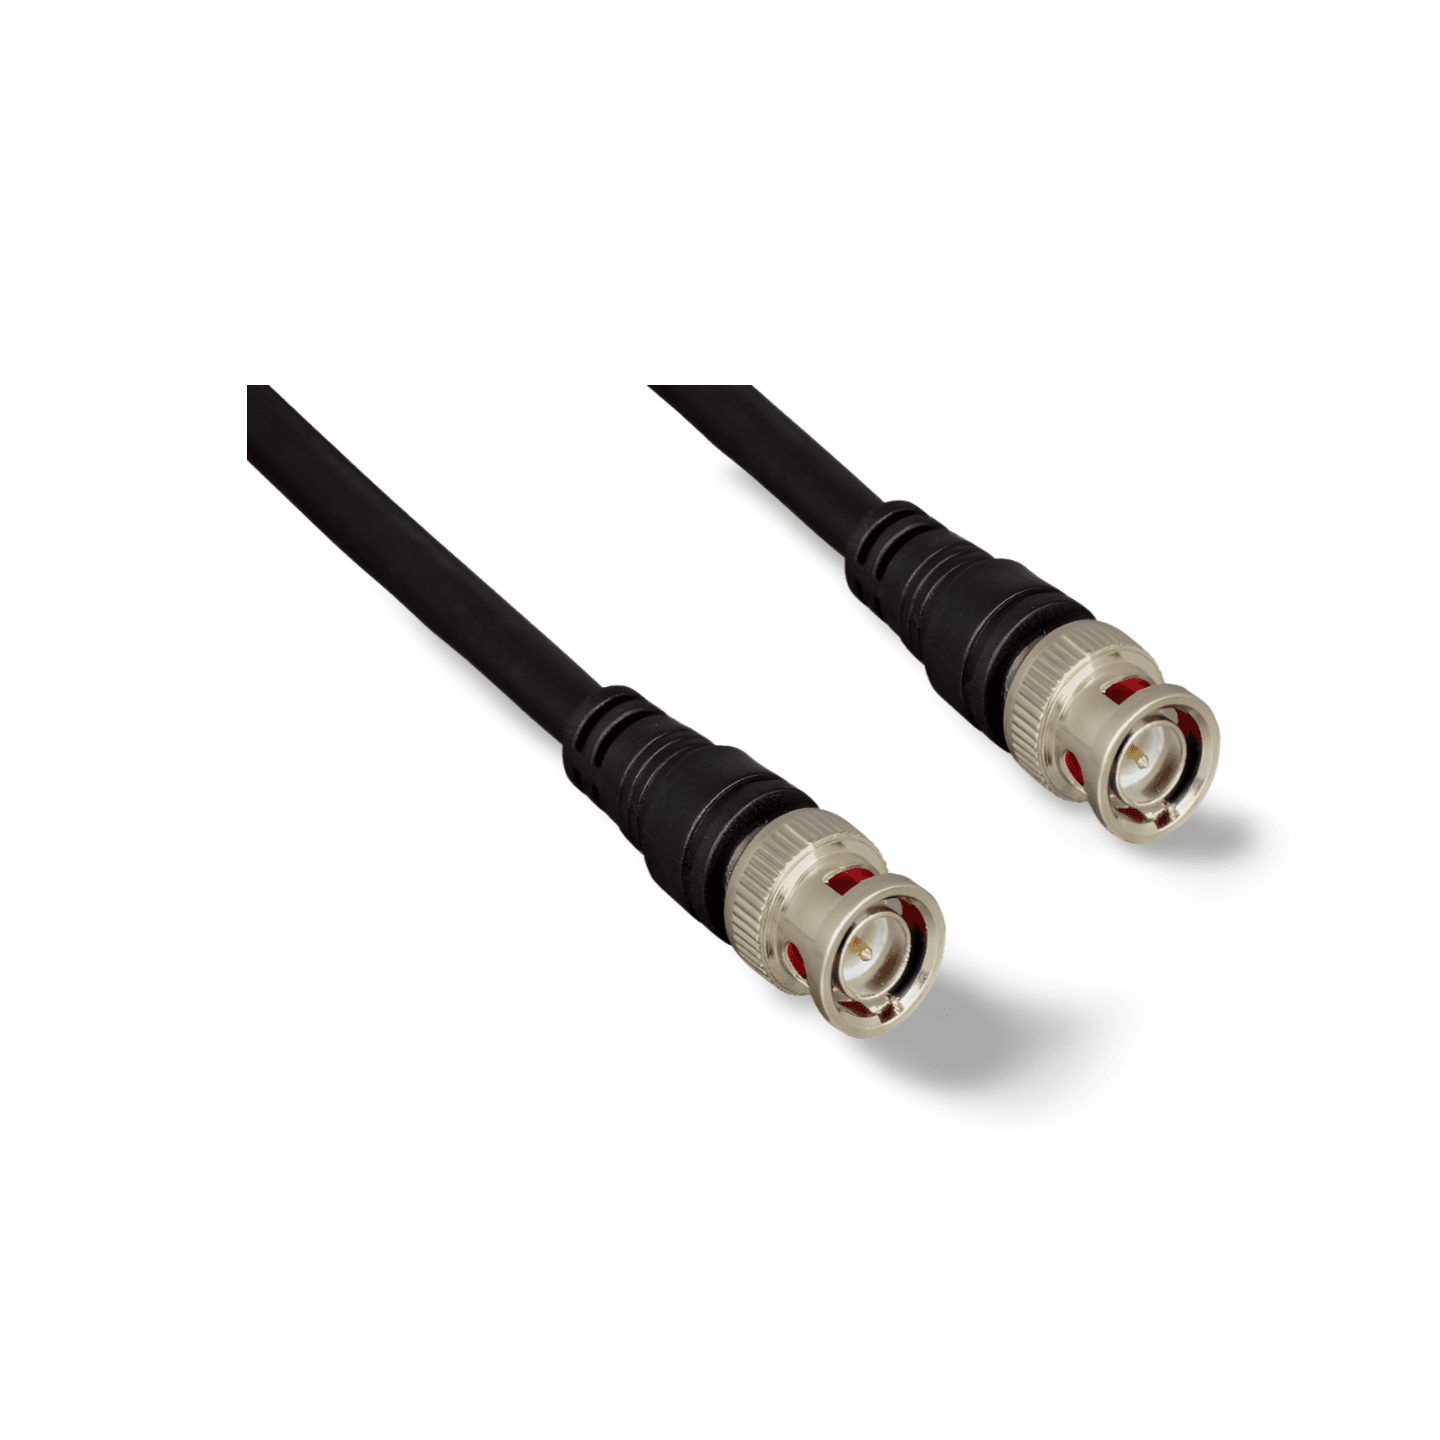 75ft BNC Male to Male RG59 Coax Cable black